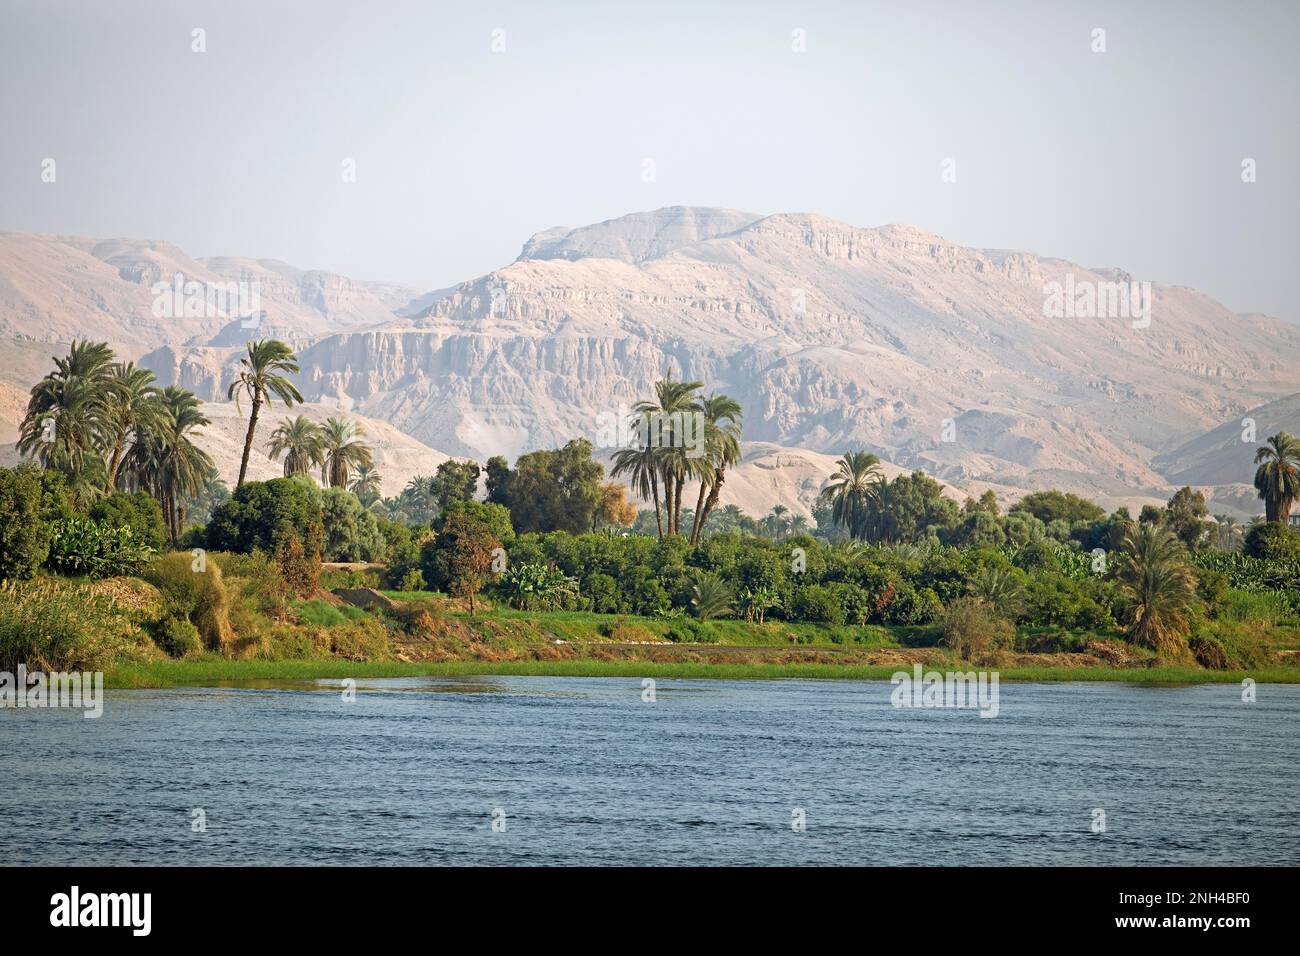 Landscape on the banks of the Nile, Eastern Desert in the background, Egypt Stock Photo